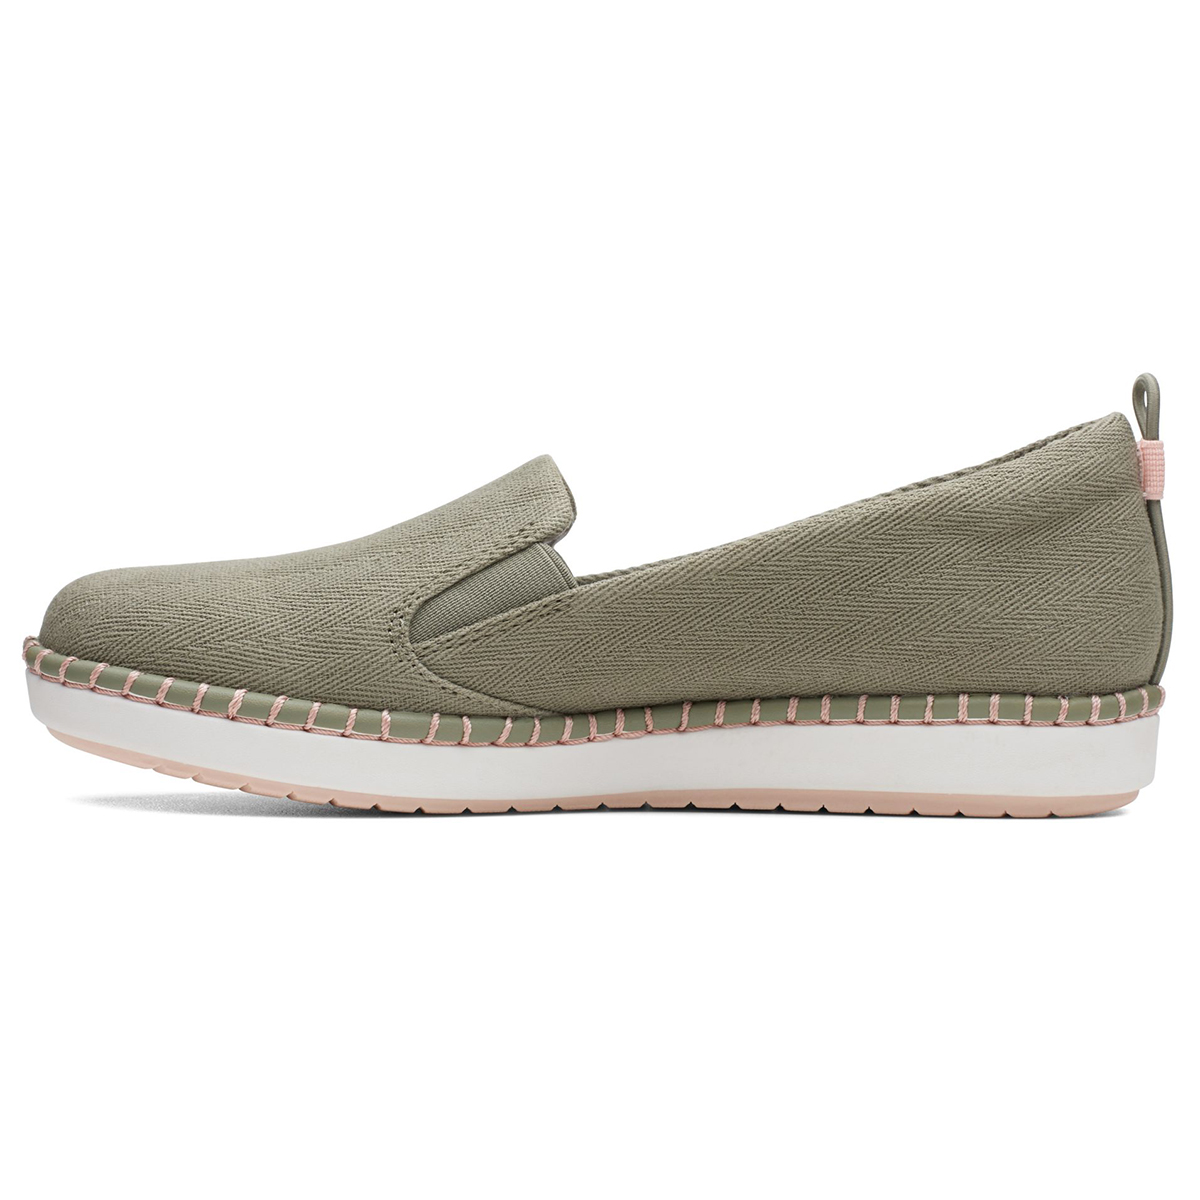 Clarks Women's Cloudstepper Step Glow Slip-On Shoes Olive 8 ...